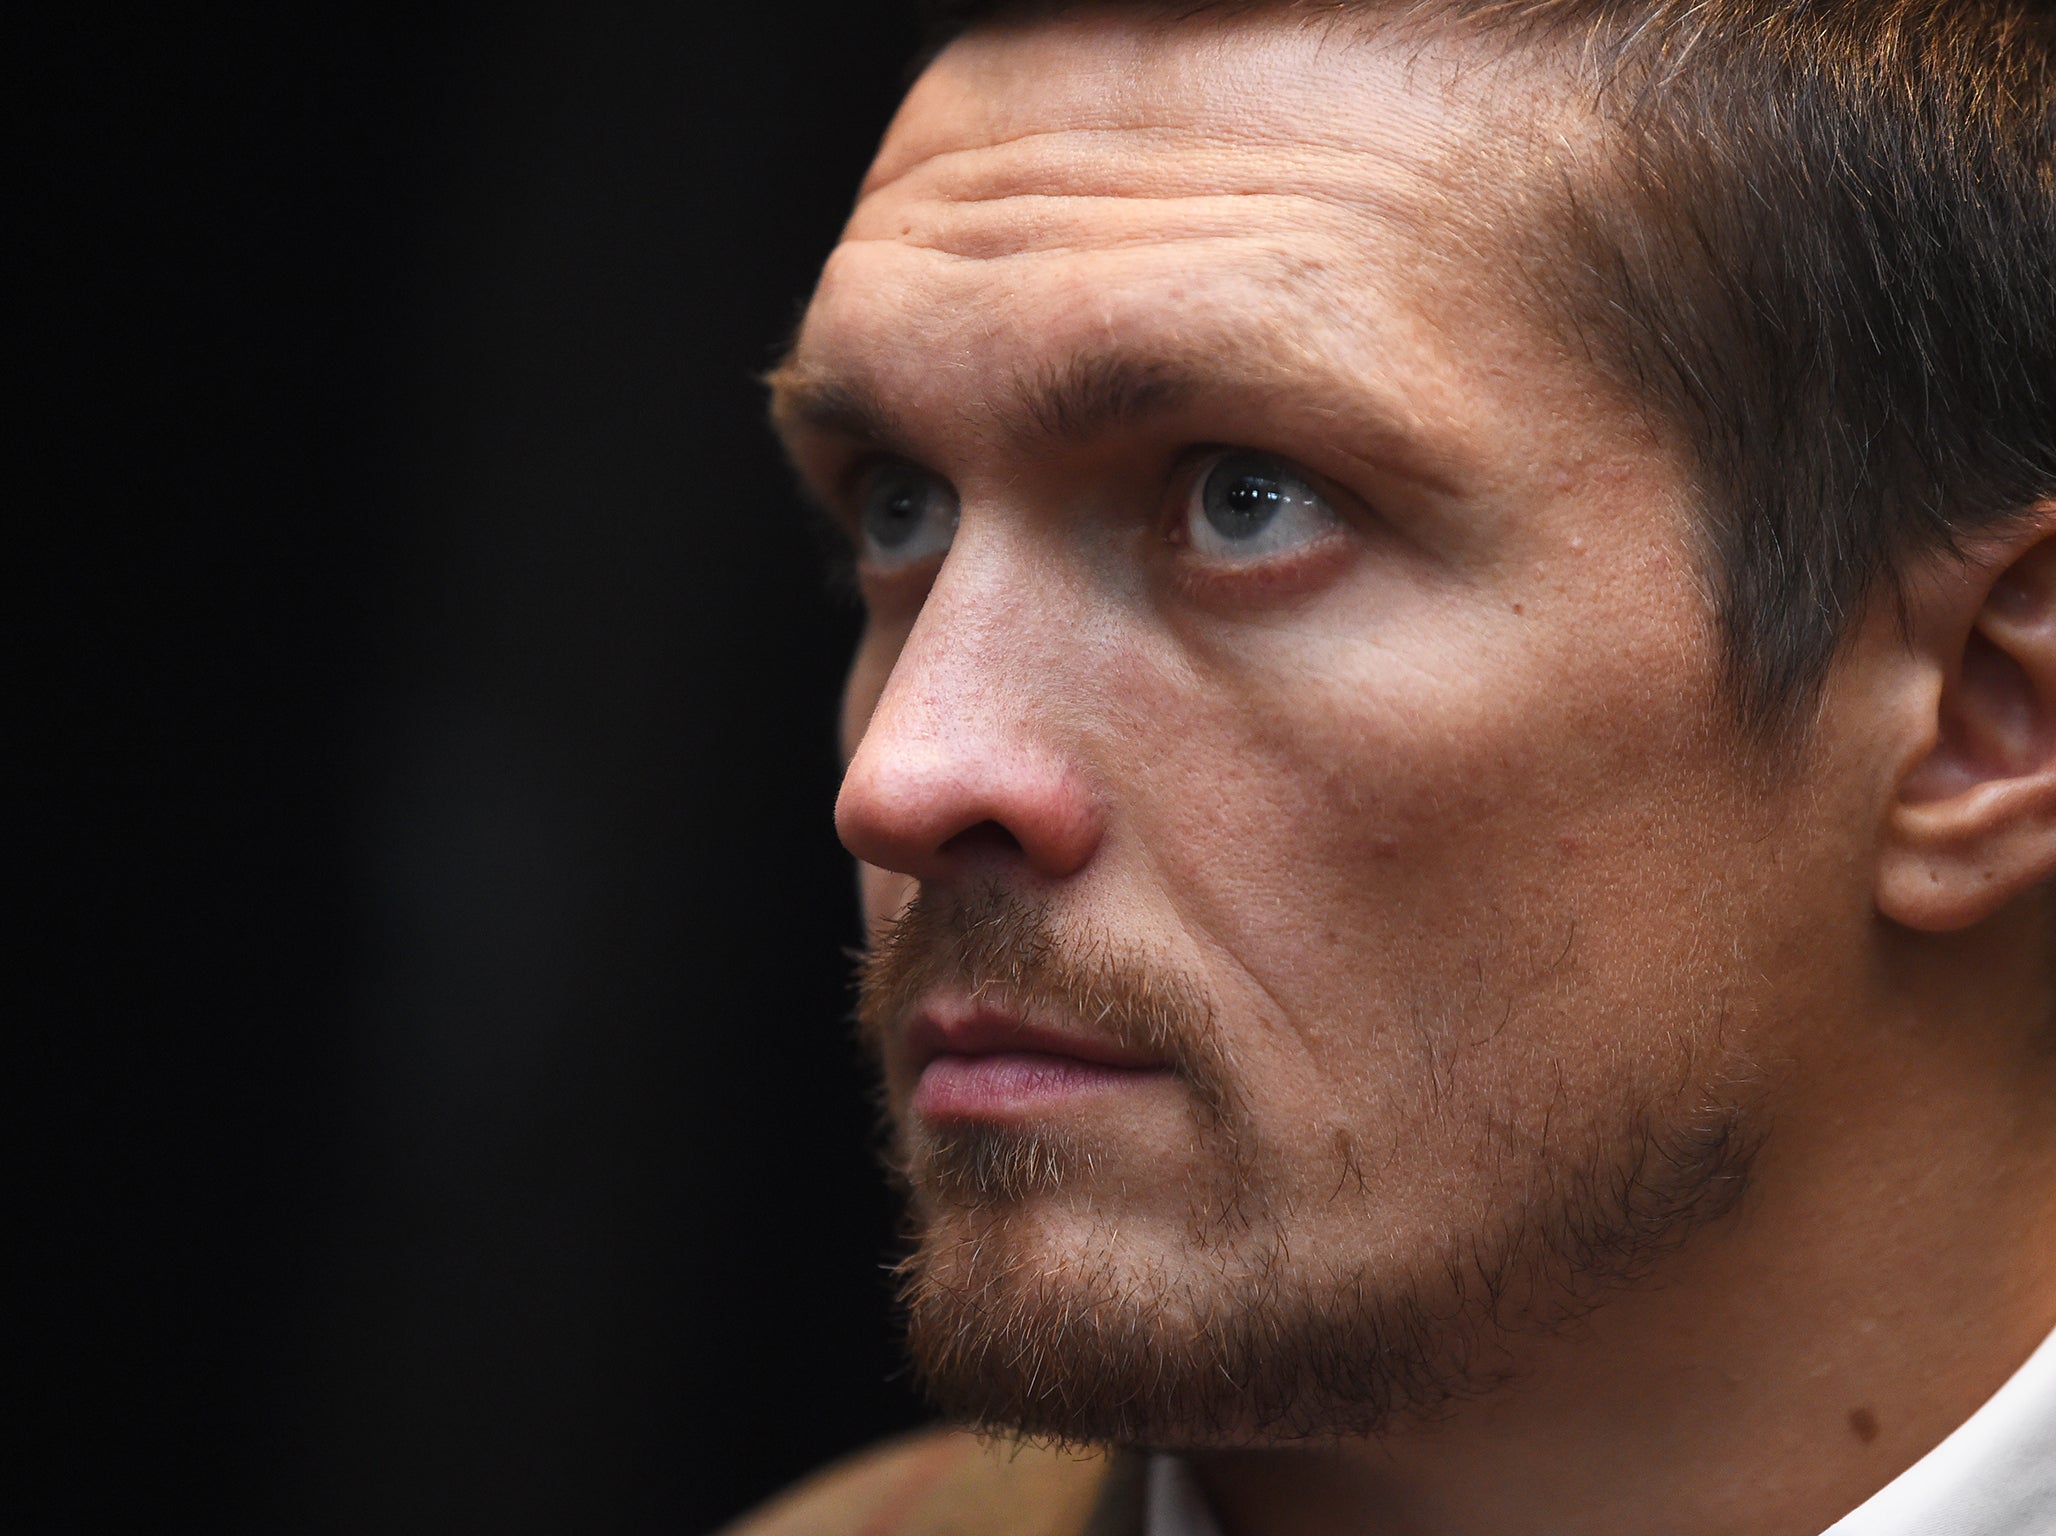 Usyk is undefeated